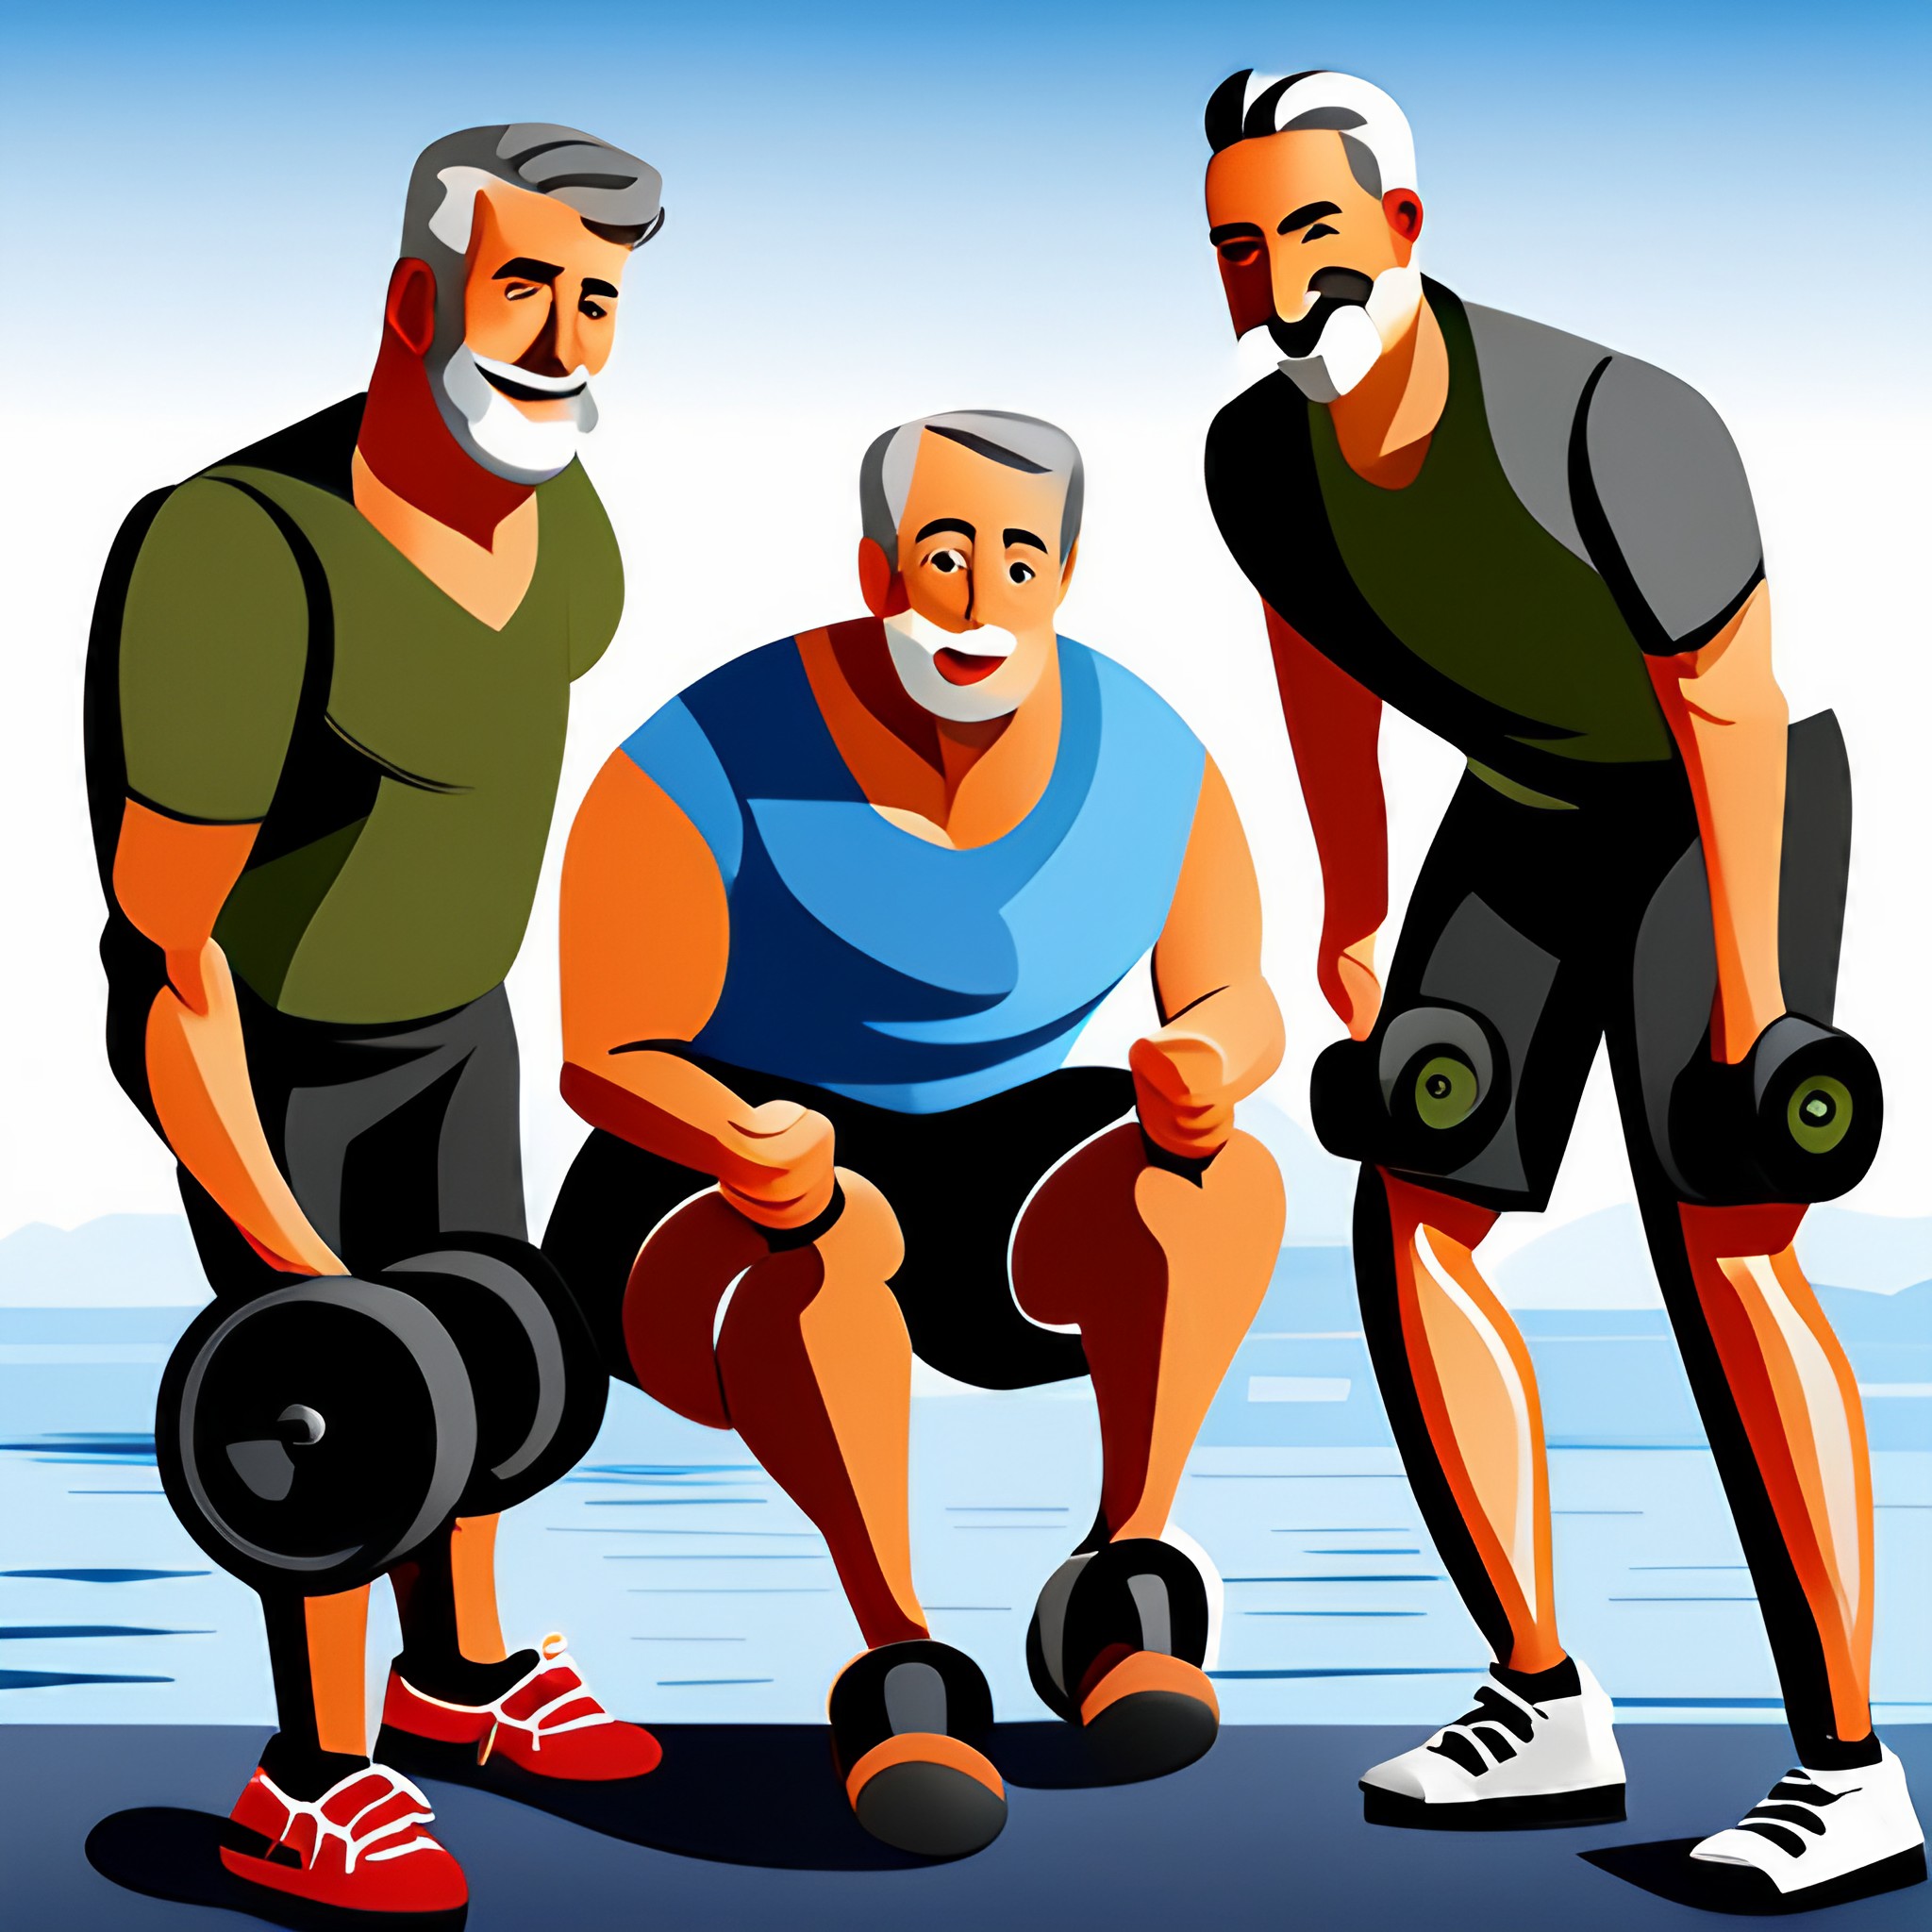 A cartoon of three middle aged men lifting weights.